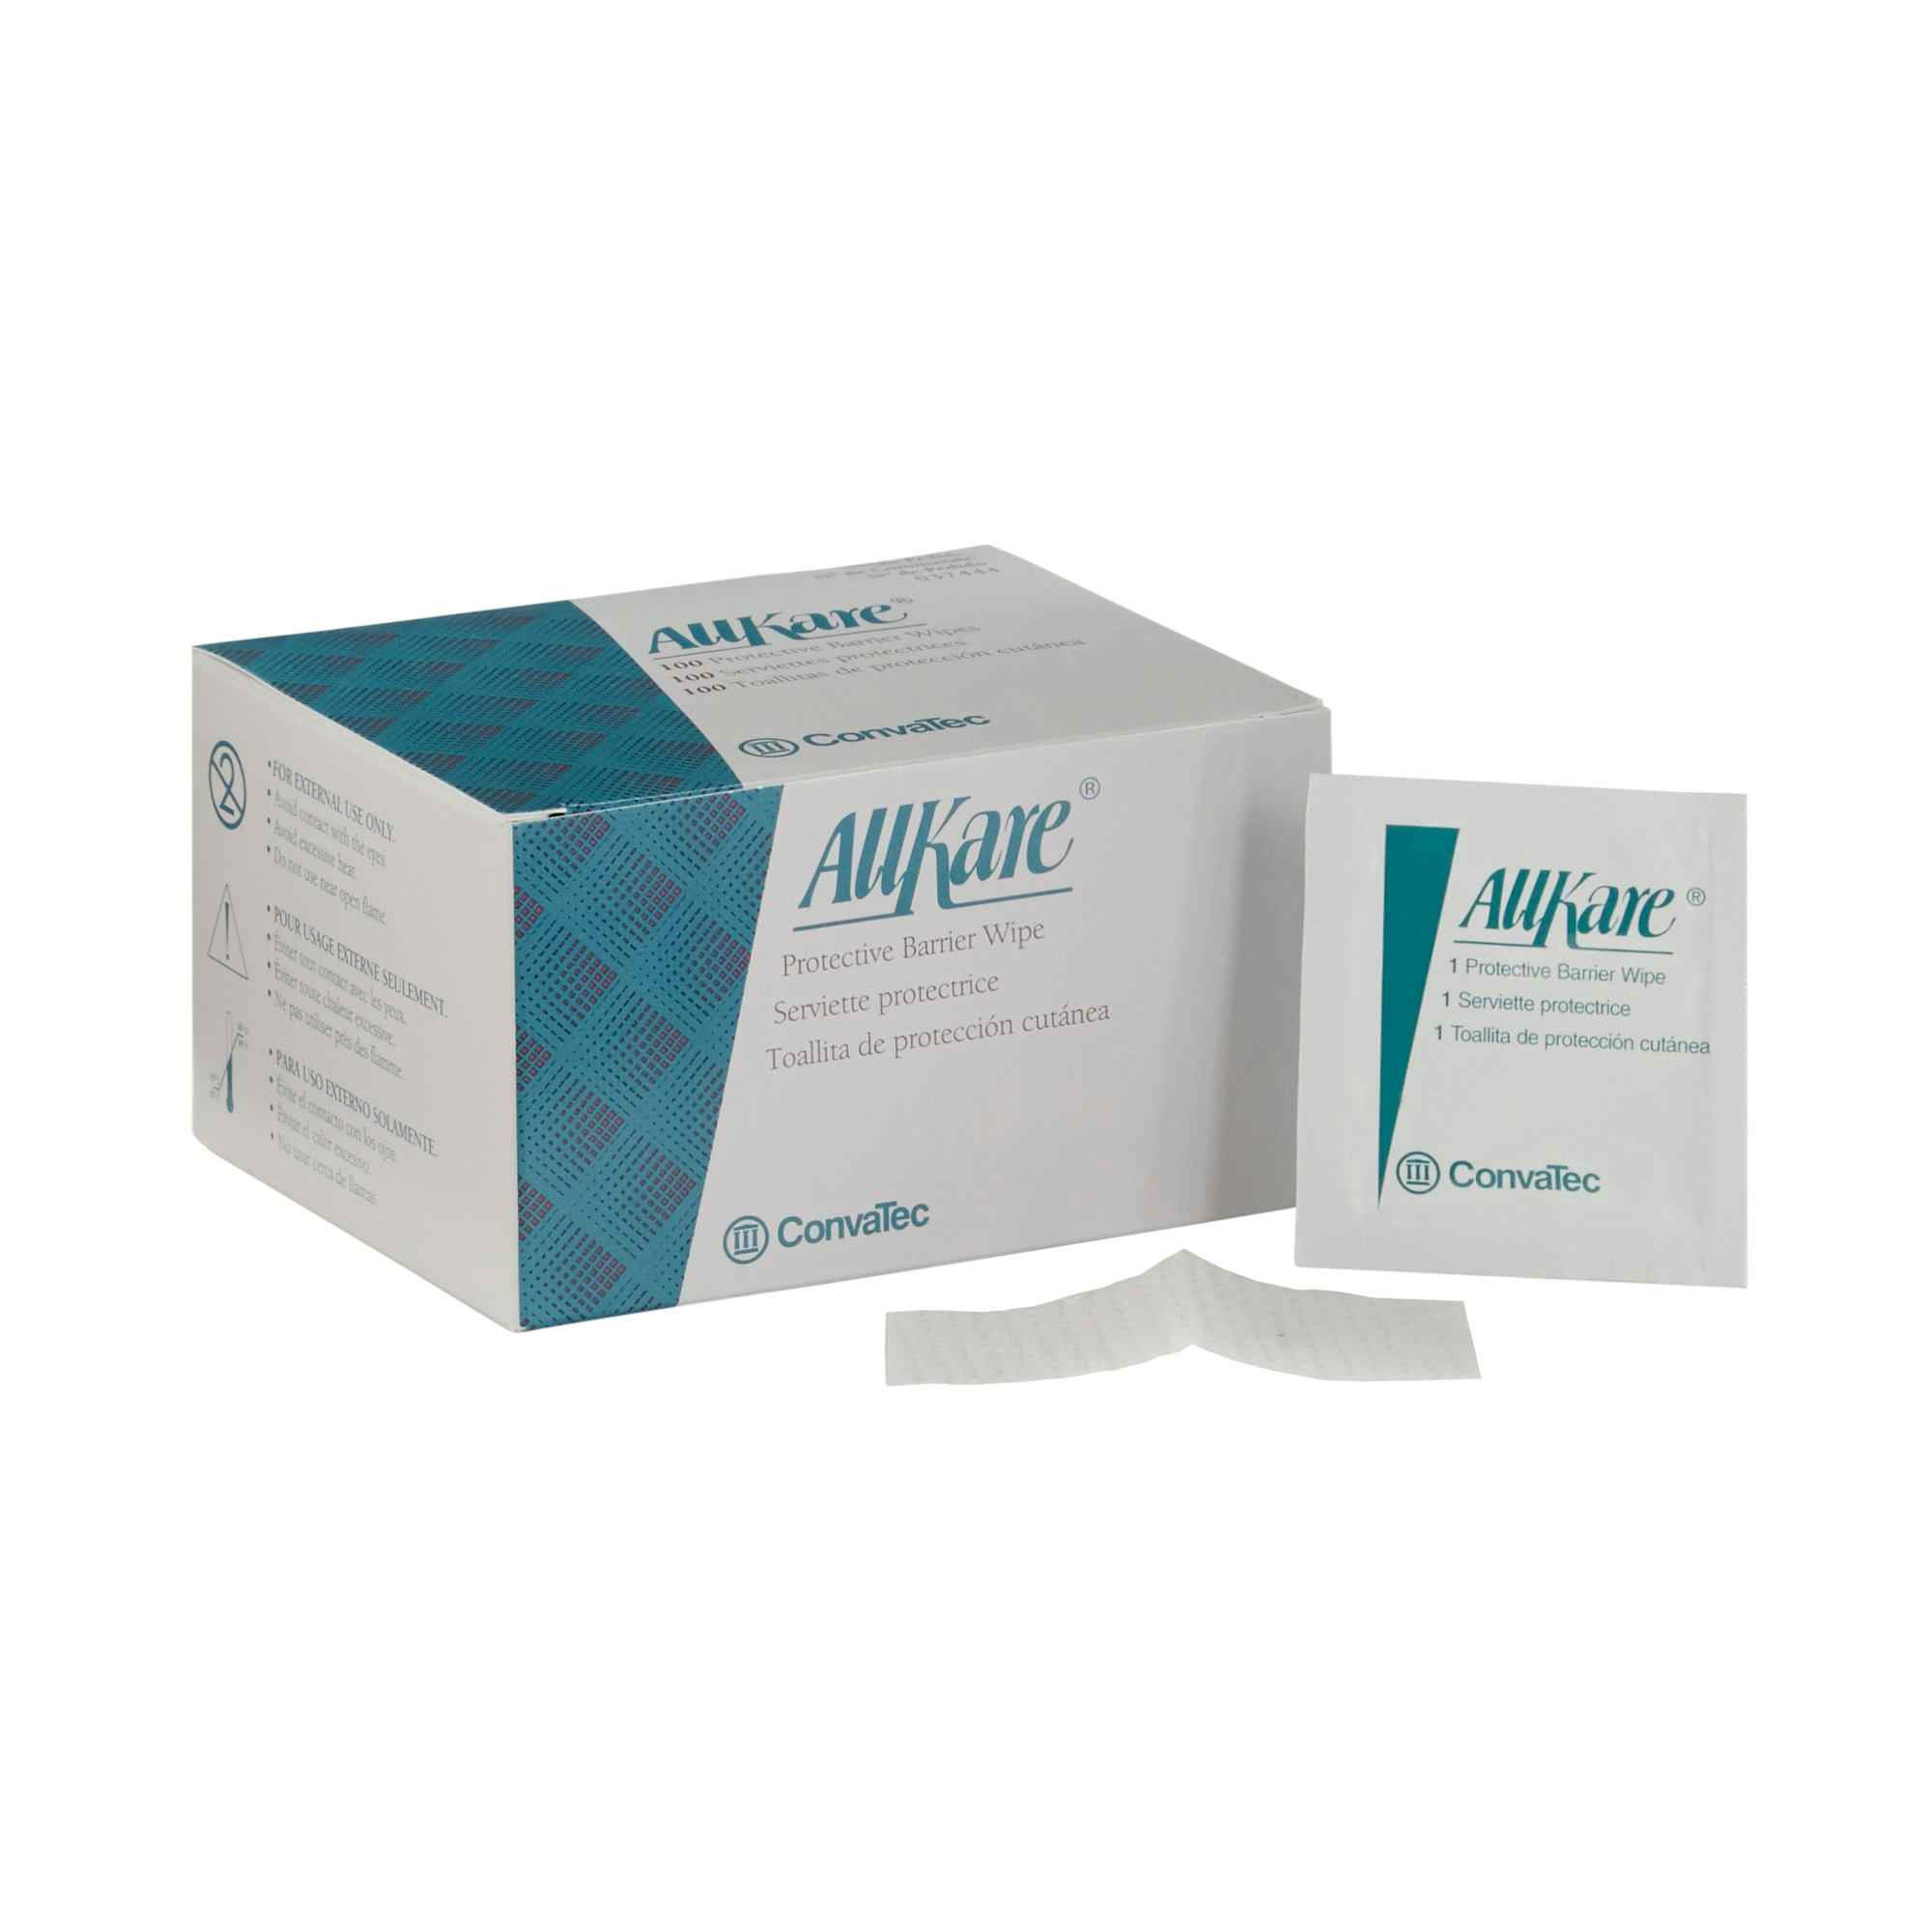 AllKare Protective Barrier Wipe, 37444, Box of 100